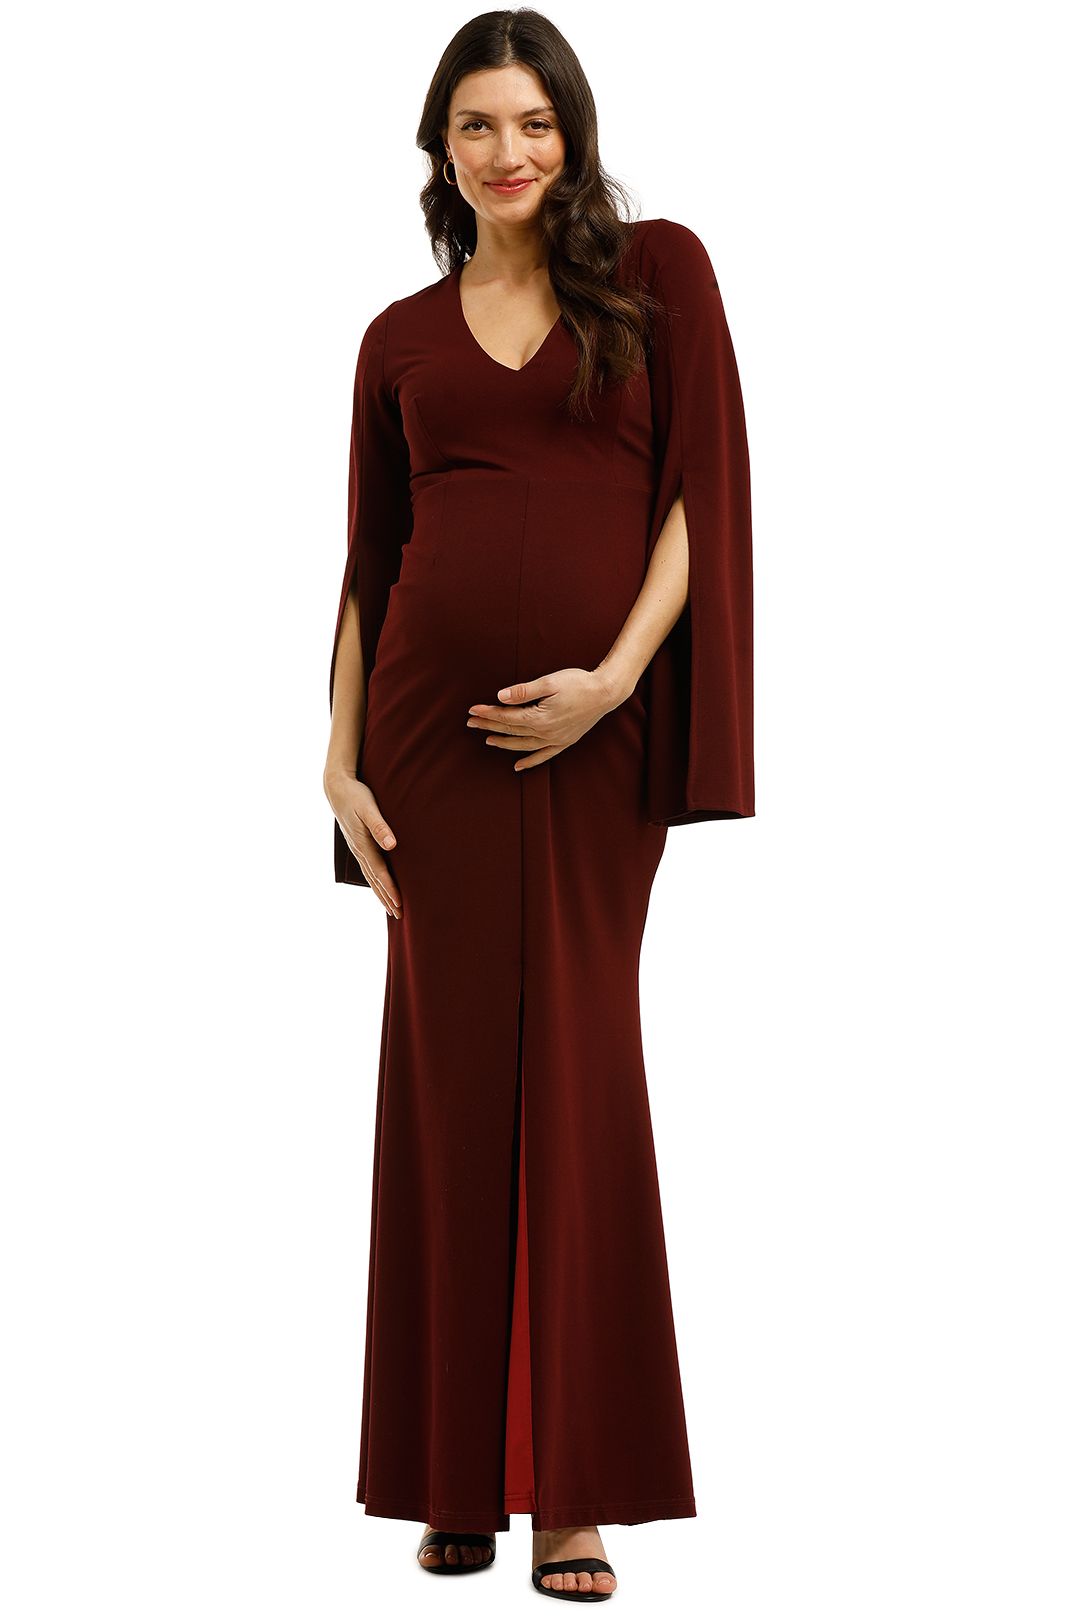 Amaryllis Gown - Wine - Front